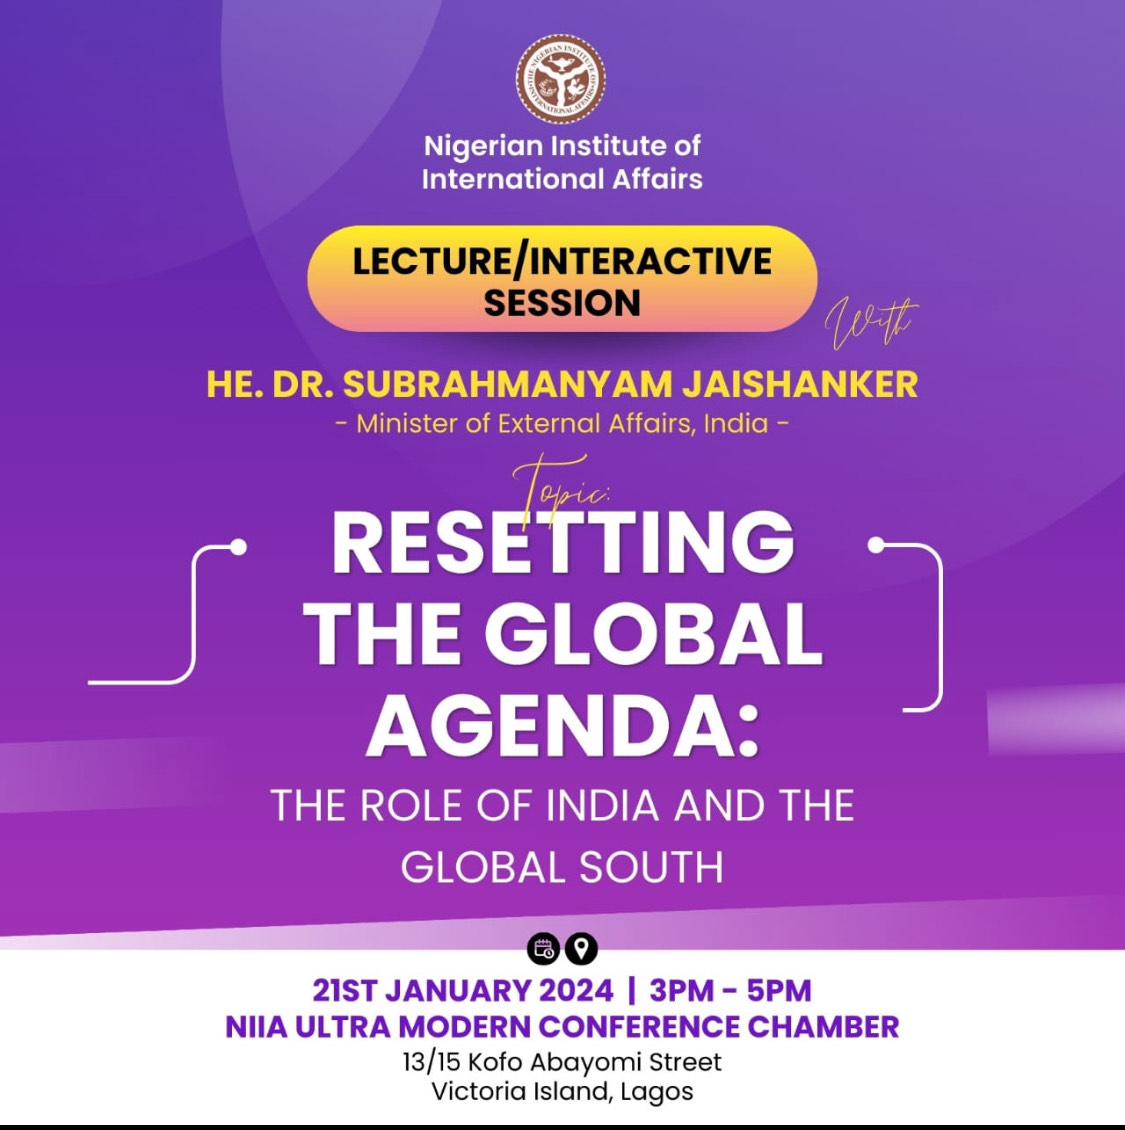 EAM @DrSJaishankar in a lecture @official_NIIA stressed on the concept of Global South and India's role in it. EAM claimed 'without the advancement of the Global South, we are not going to see planetary progress'. An excellent thread on 'What is Global South?' (1/7)